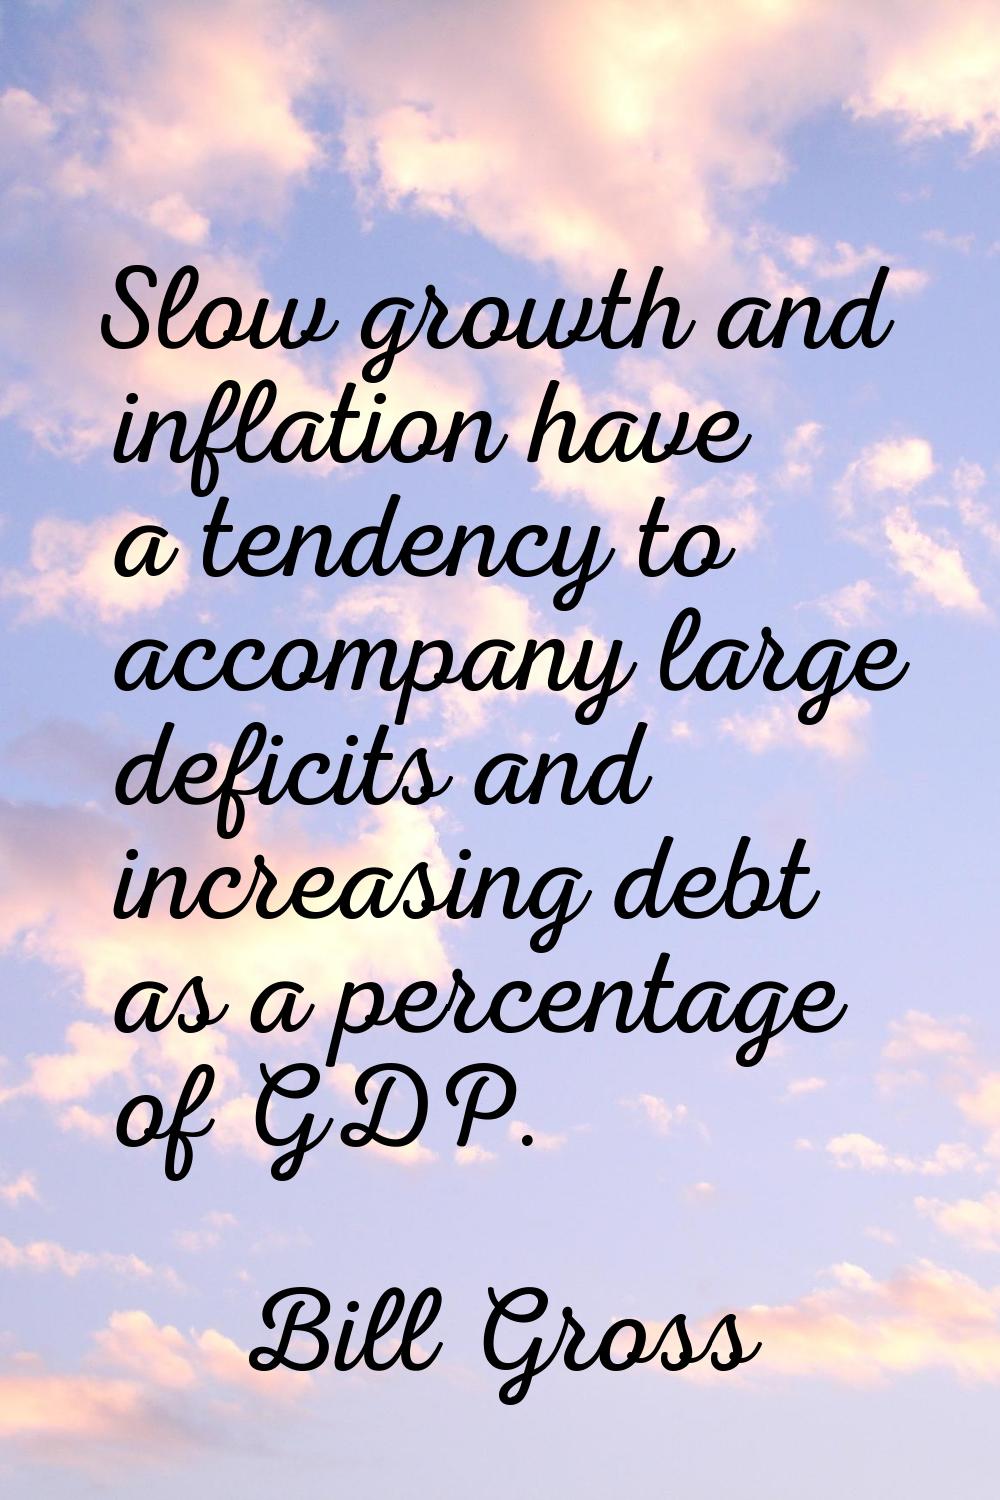 Slow growth and inflation have a tendency to accompany large deficits and increasing debt as a perc